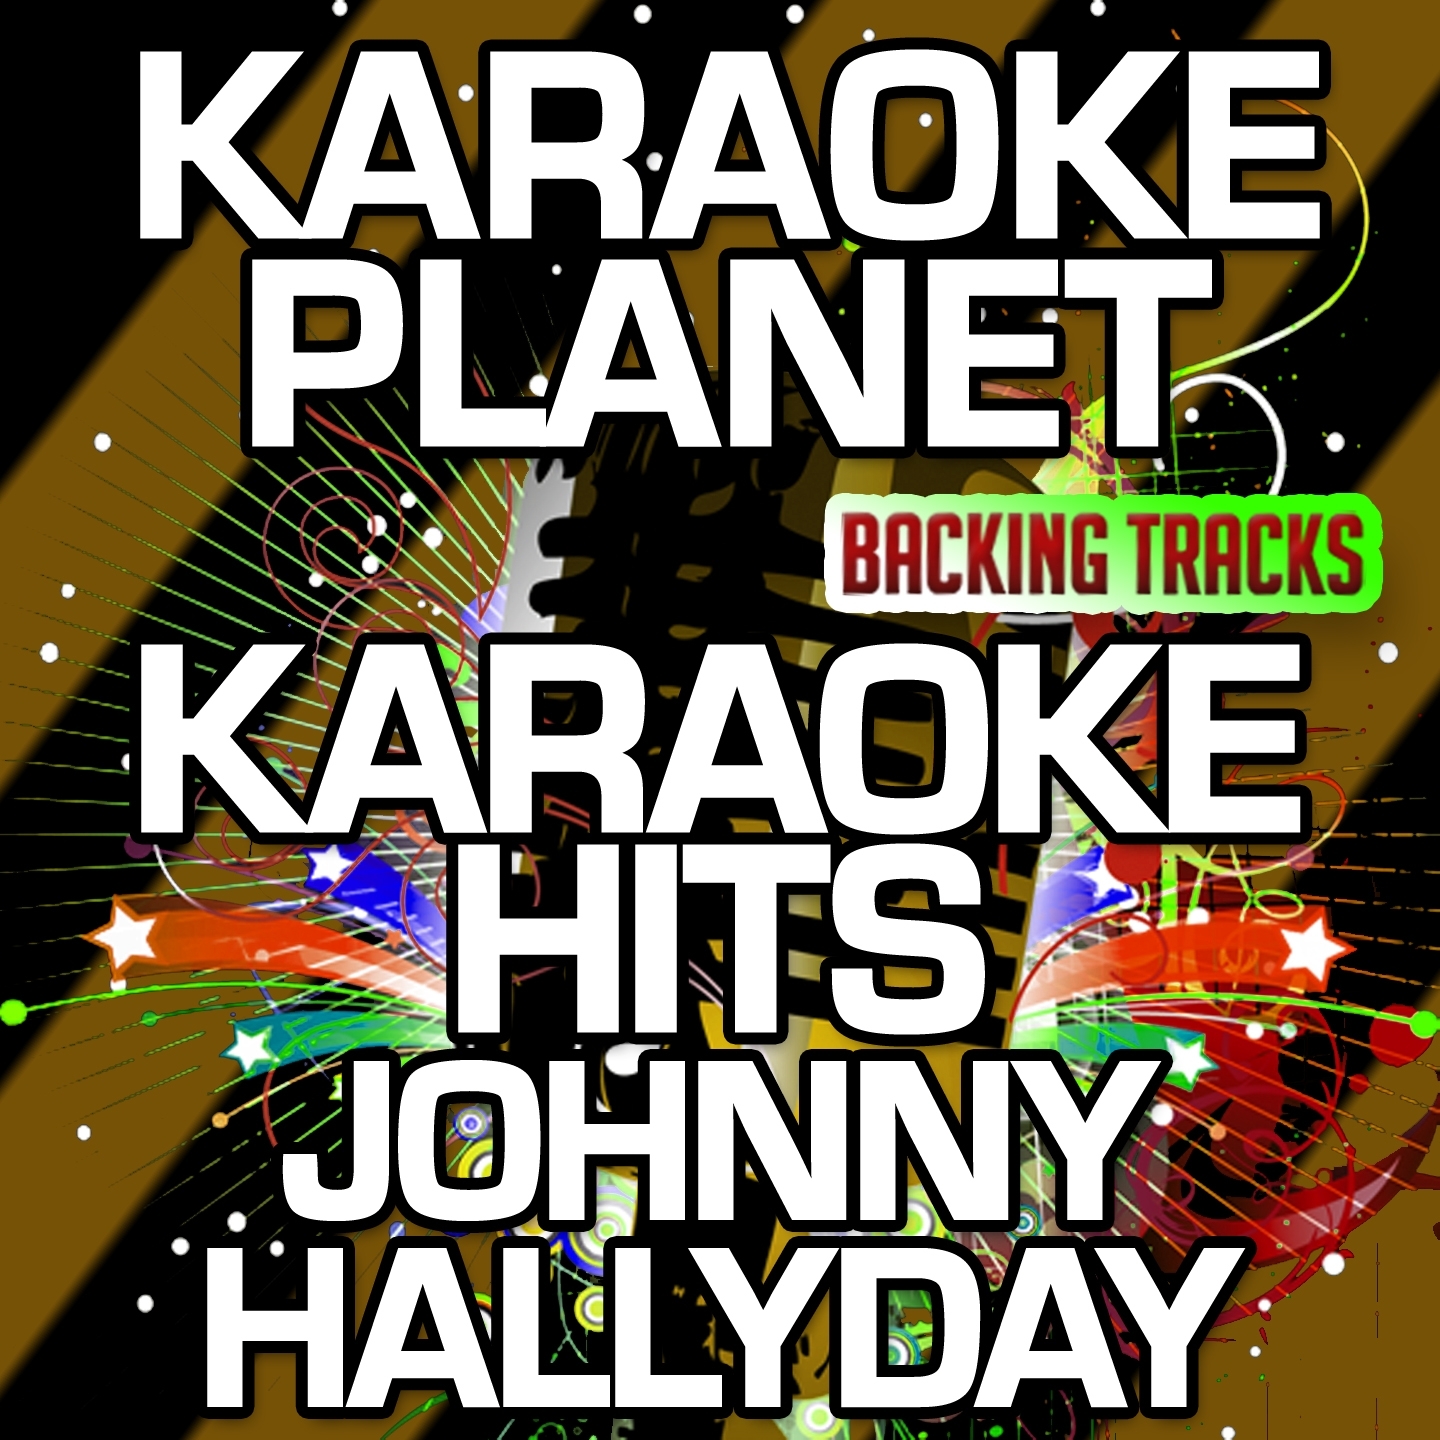 Rock 'n' Roll Man (Karaoke Version With Background Vocals) (Originally Performed By Johnny Hallyday)